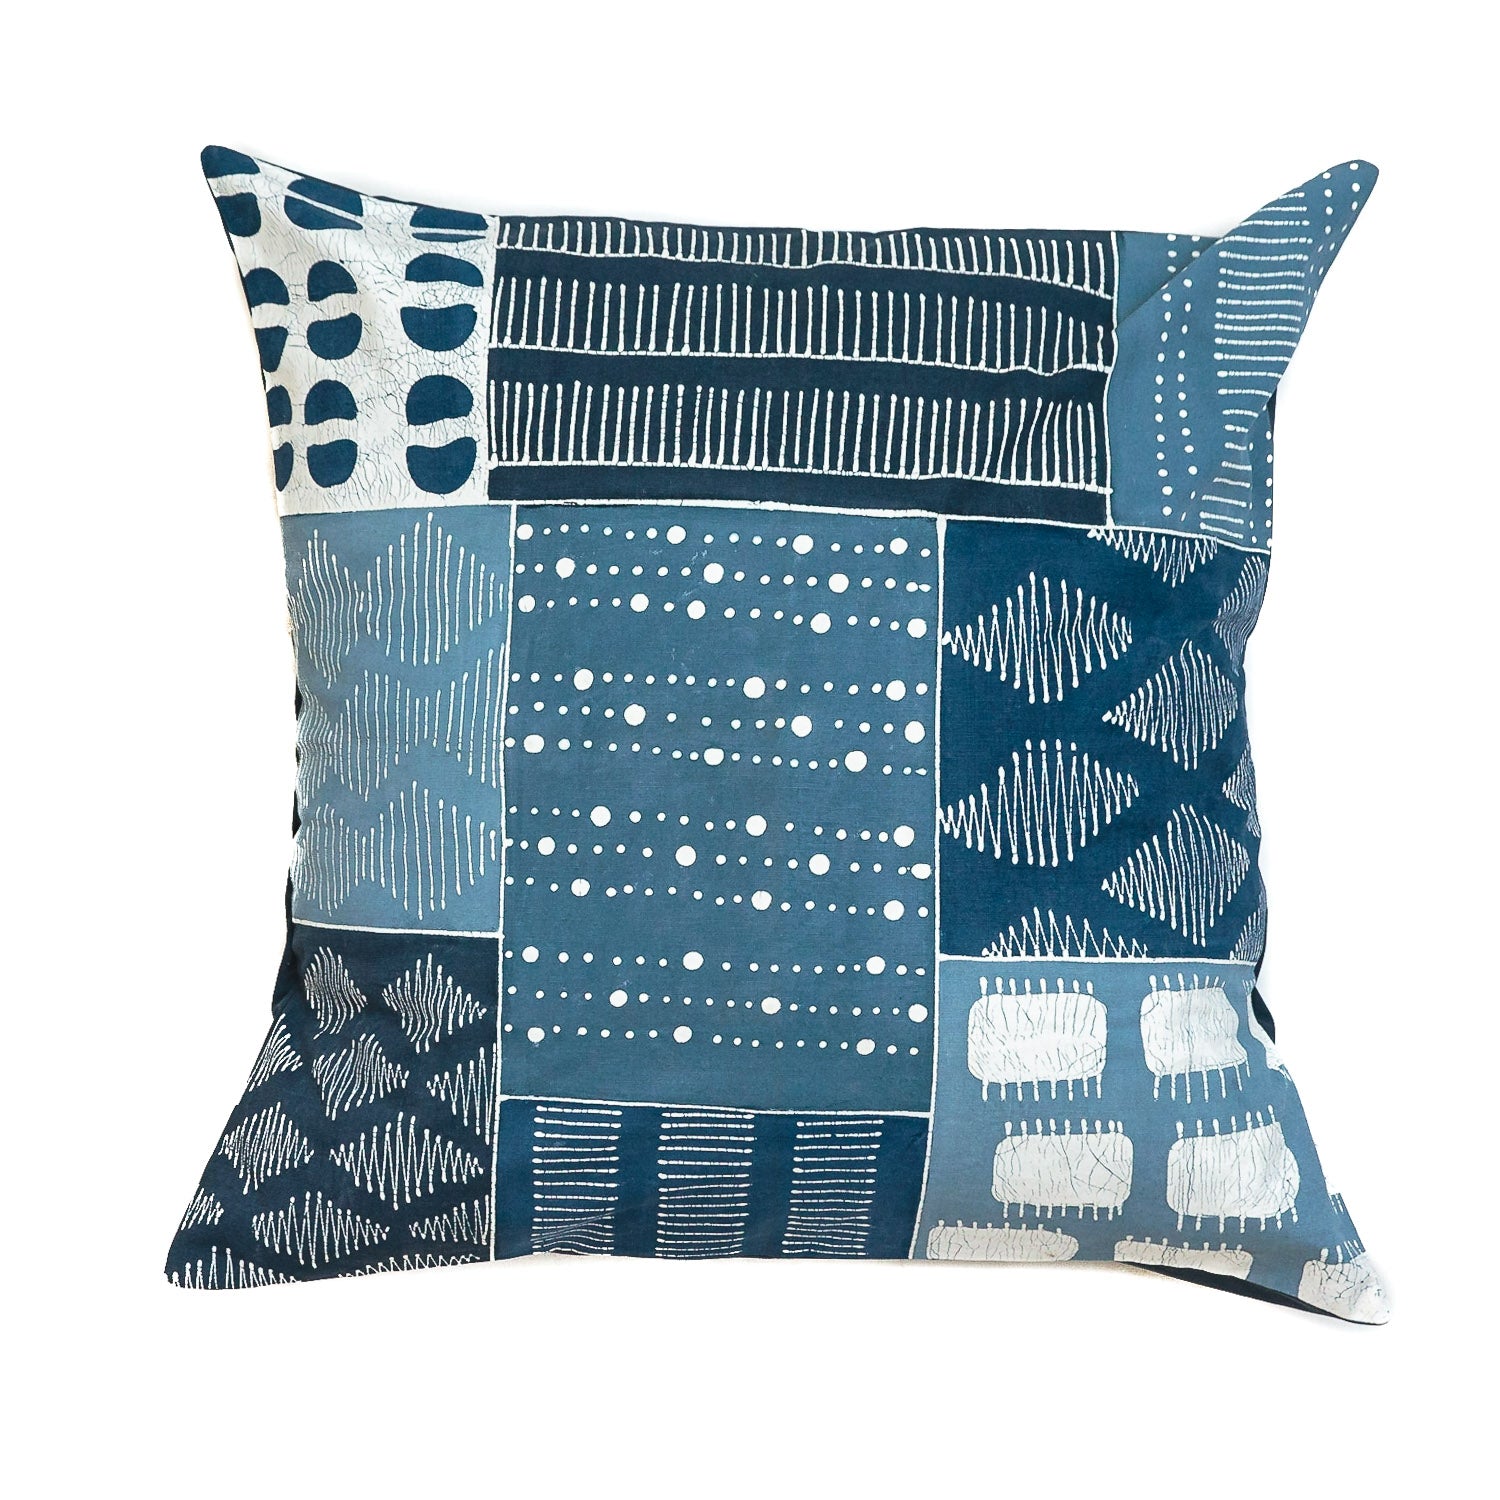 Tribal Cloth Indigo Patchwork Cushion Cover - Hand Painted by TRIBAL TEXTILES - Handcrafted Home Decor Interiors